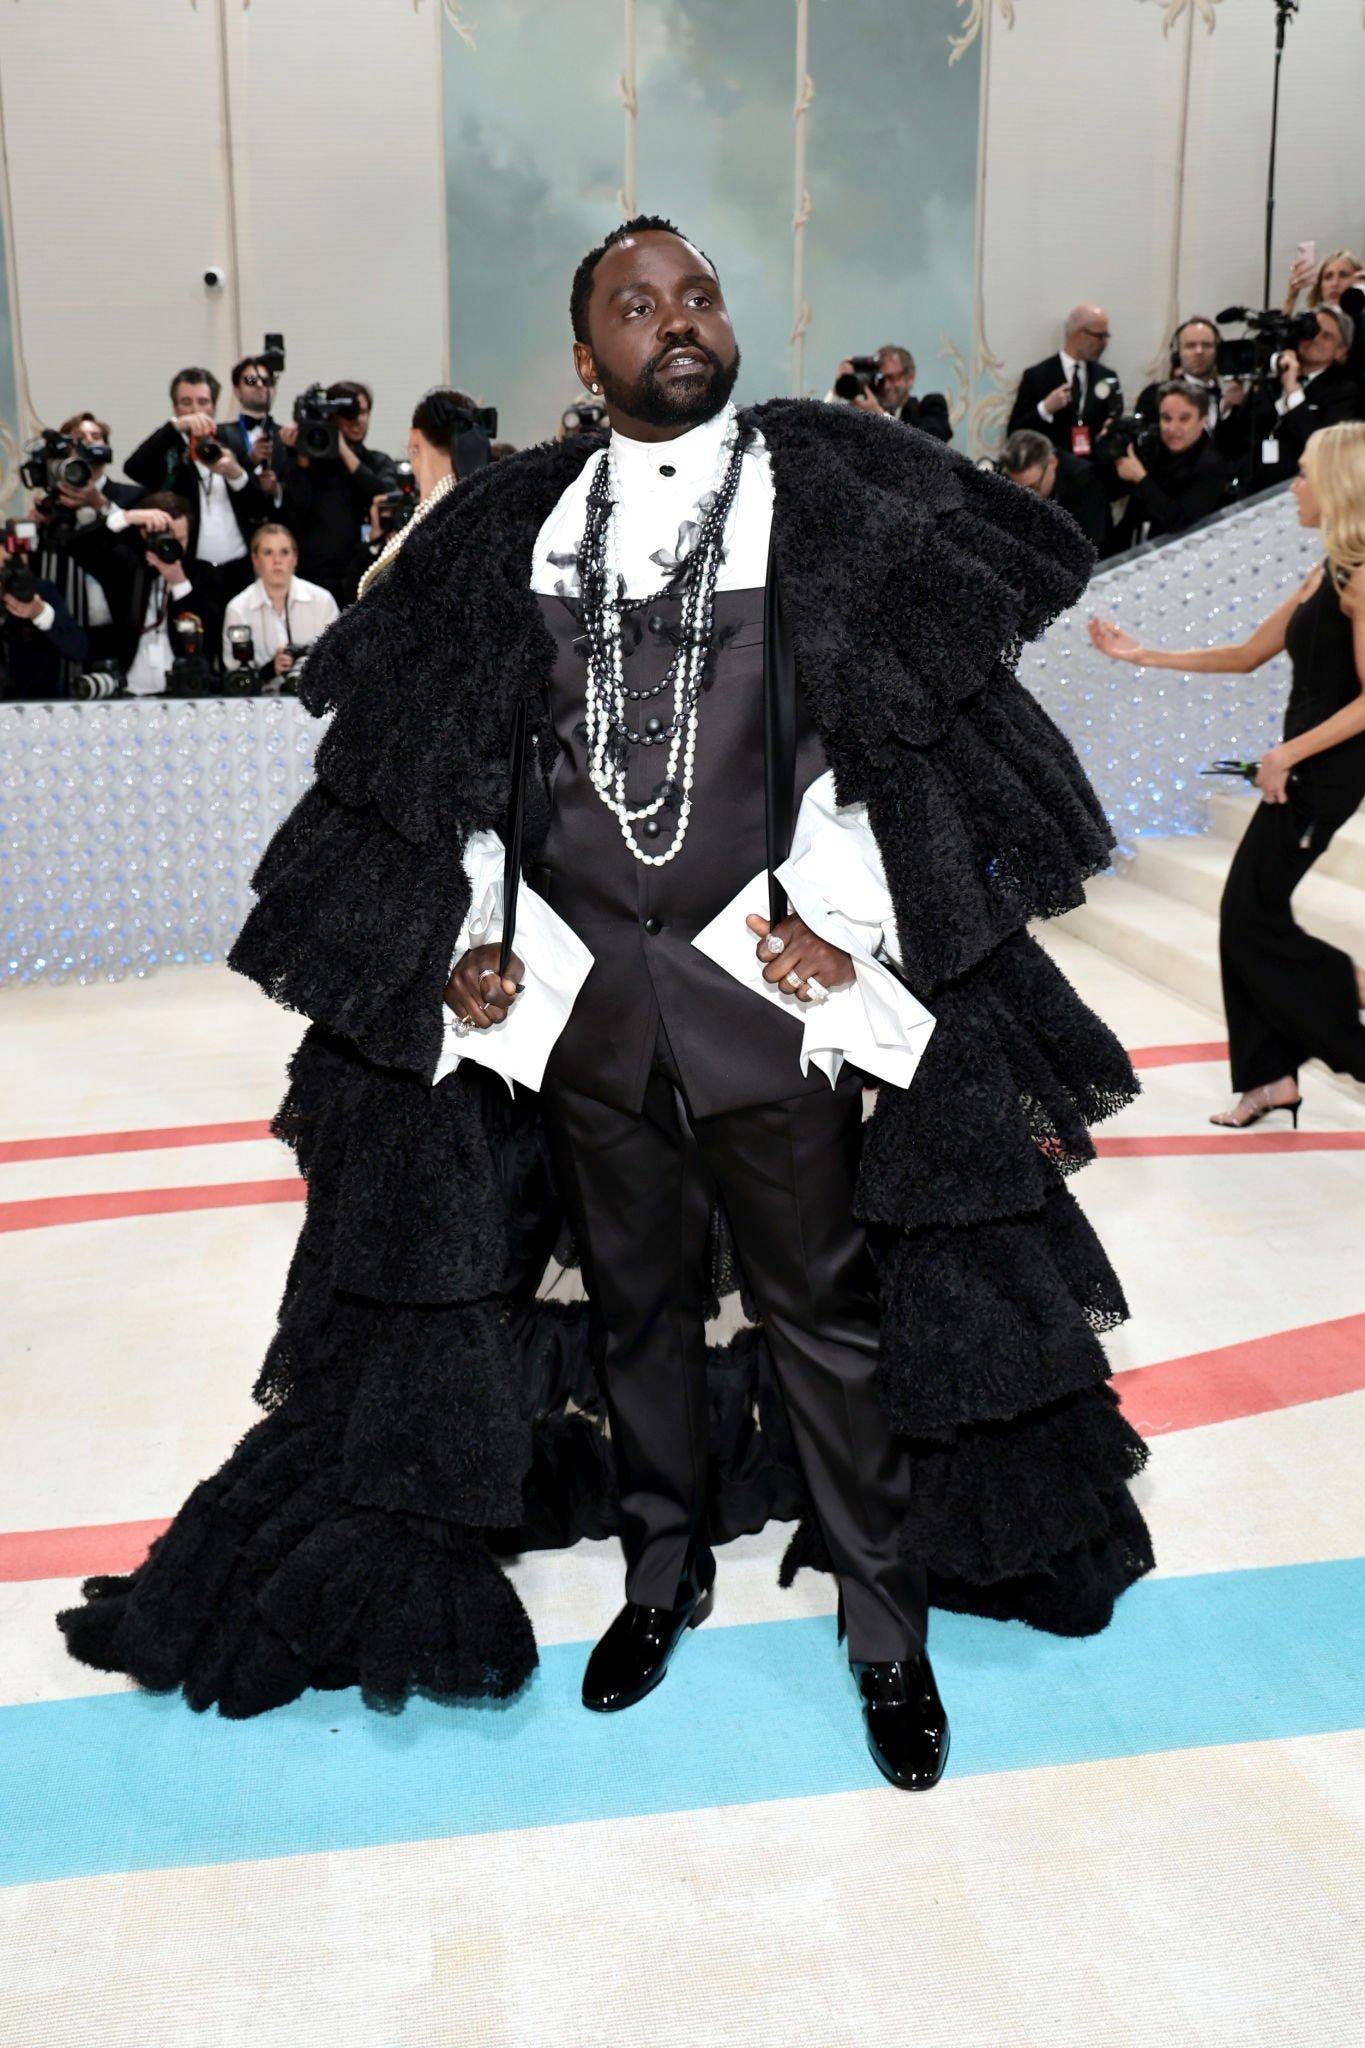 SinnamonSCouture on Twitter: "Brian Tyree Henry at the #MetGala  https://t.co/iHFYtGrsf1" / Twitter